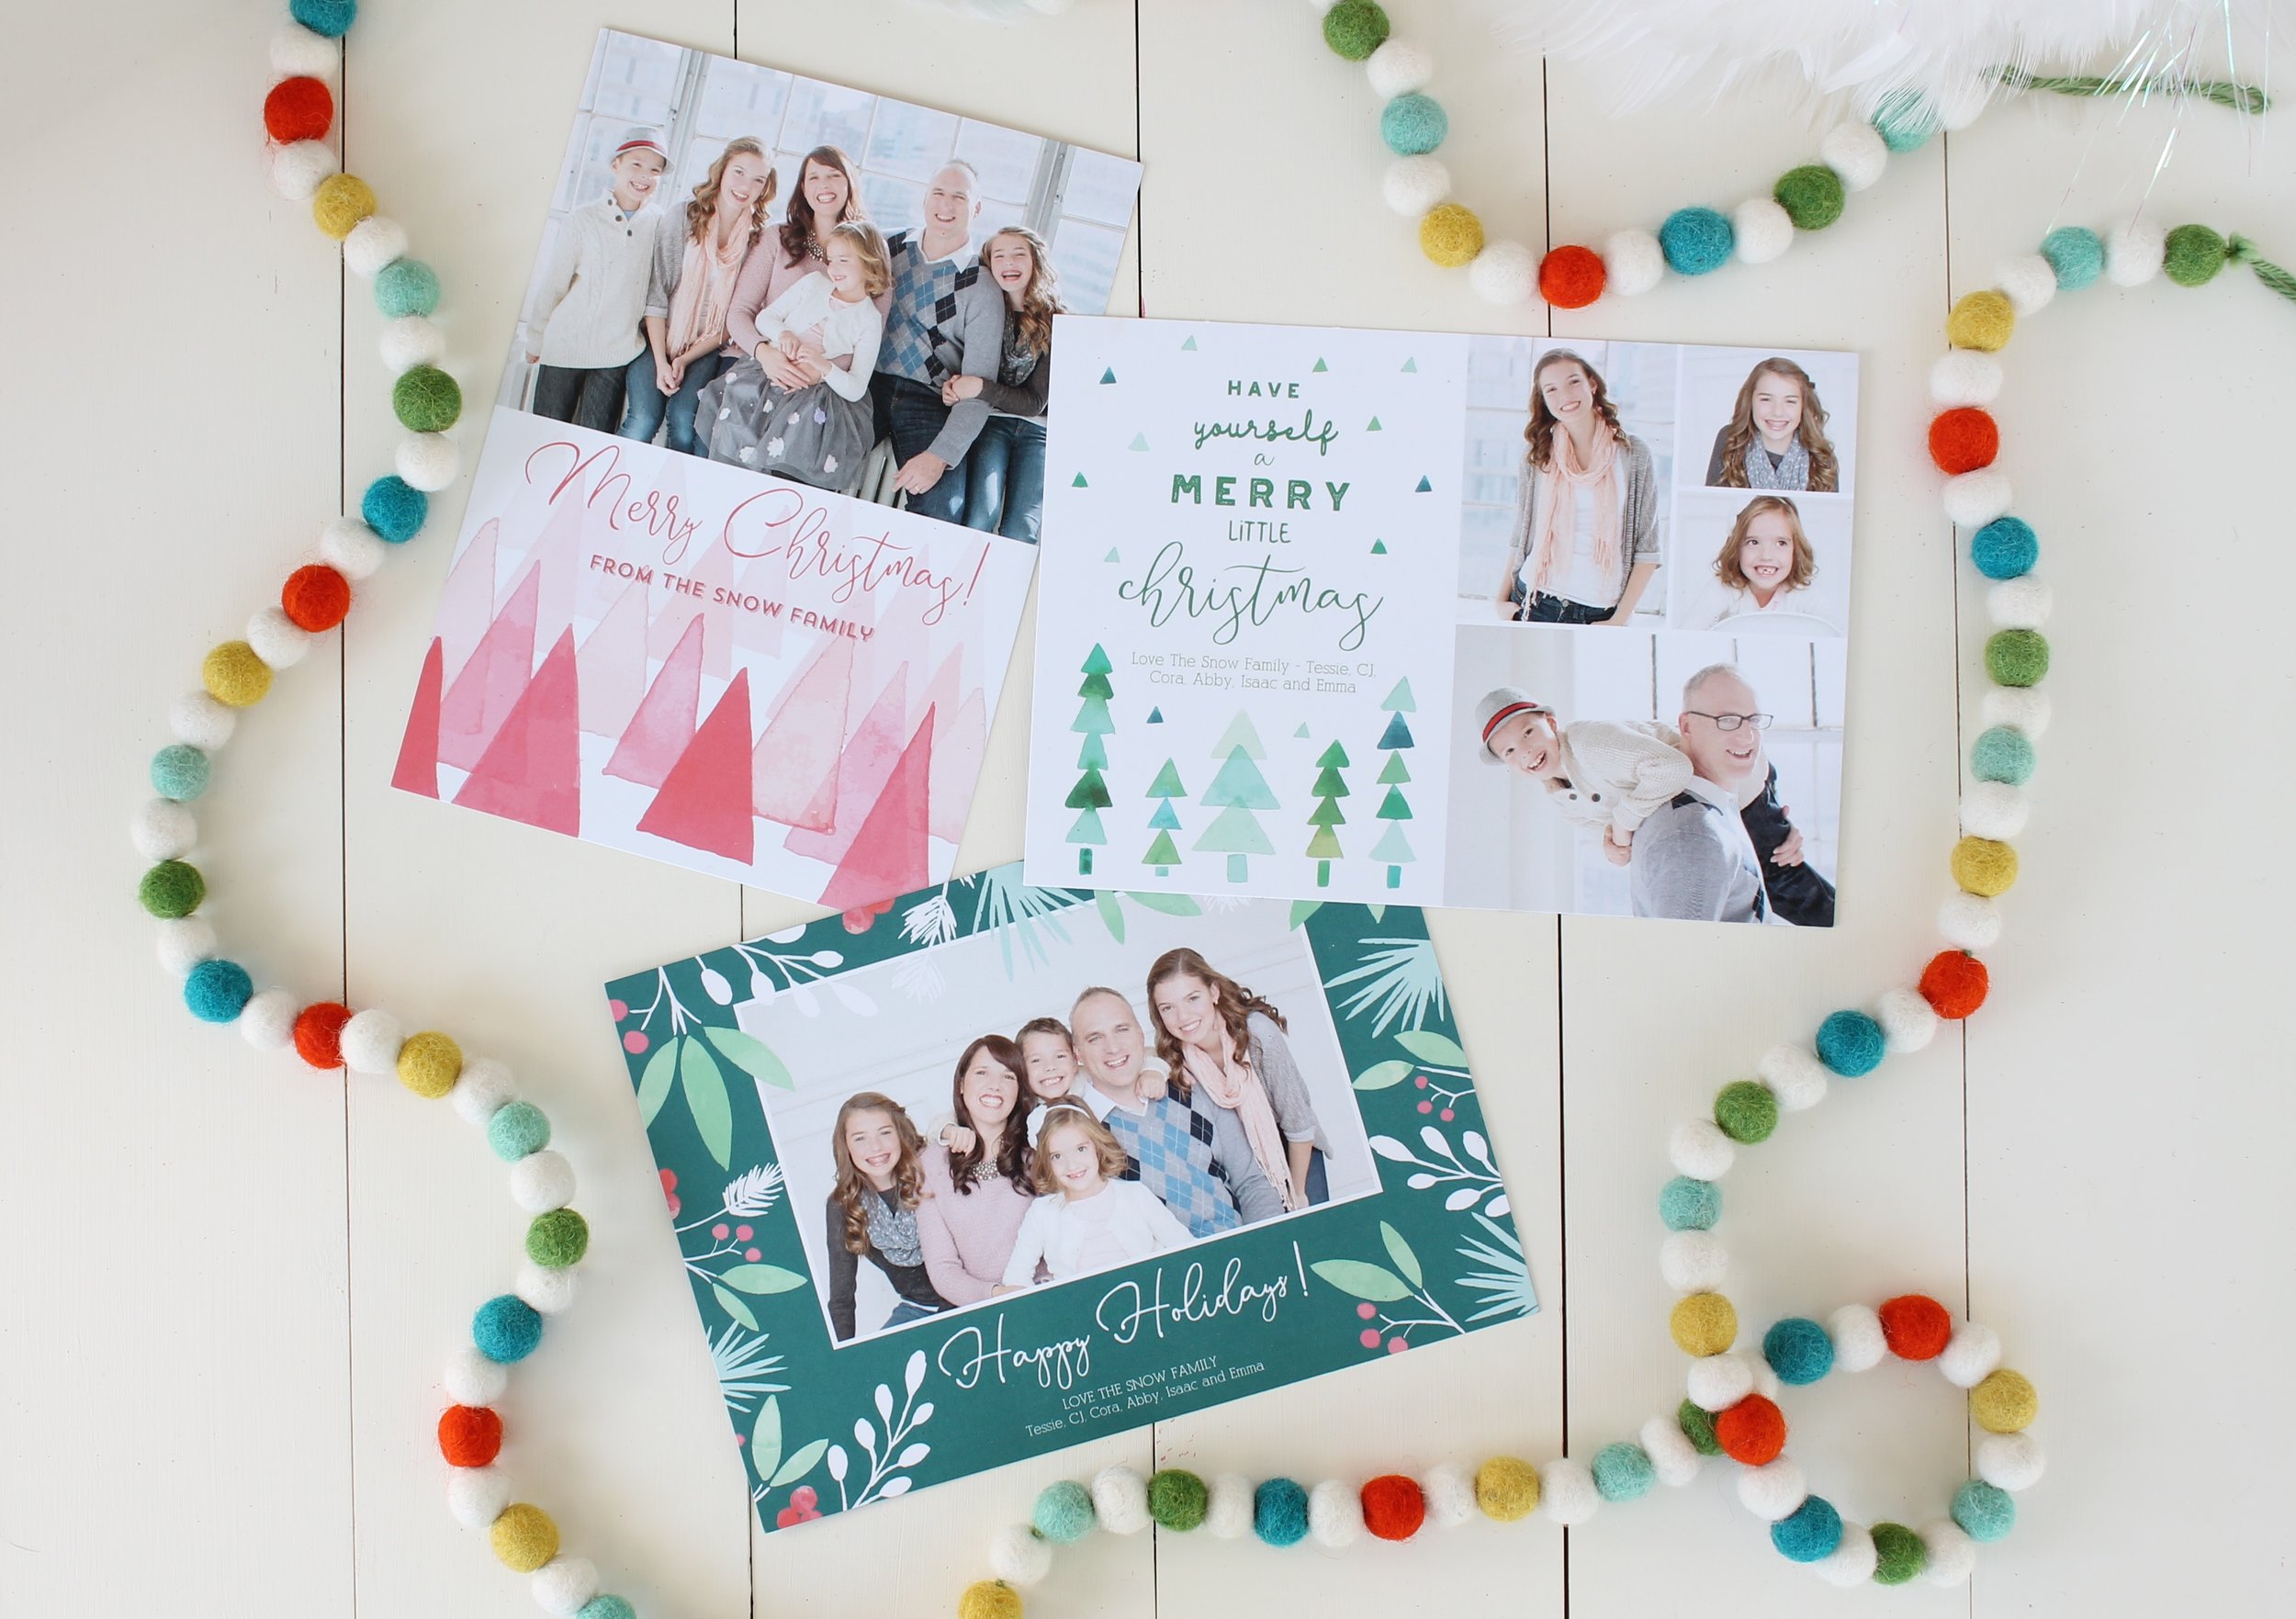 Holiday cards by Mixbook. Designed by Tessie Fay.